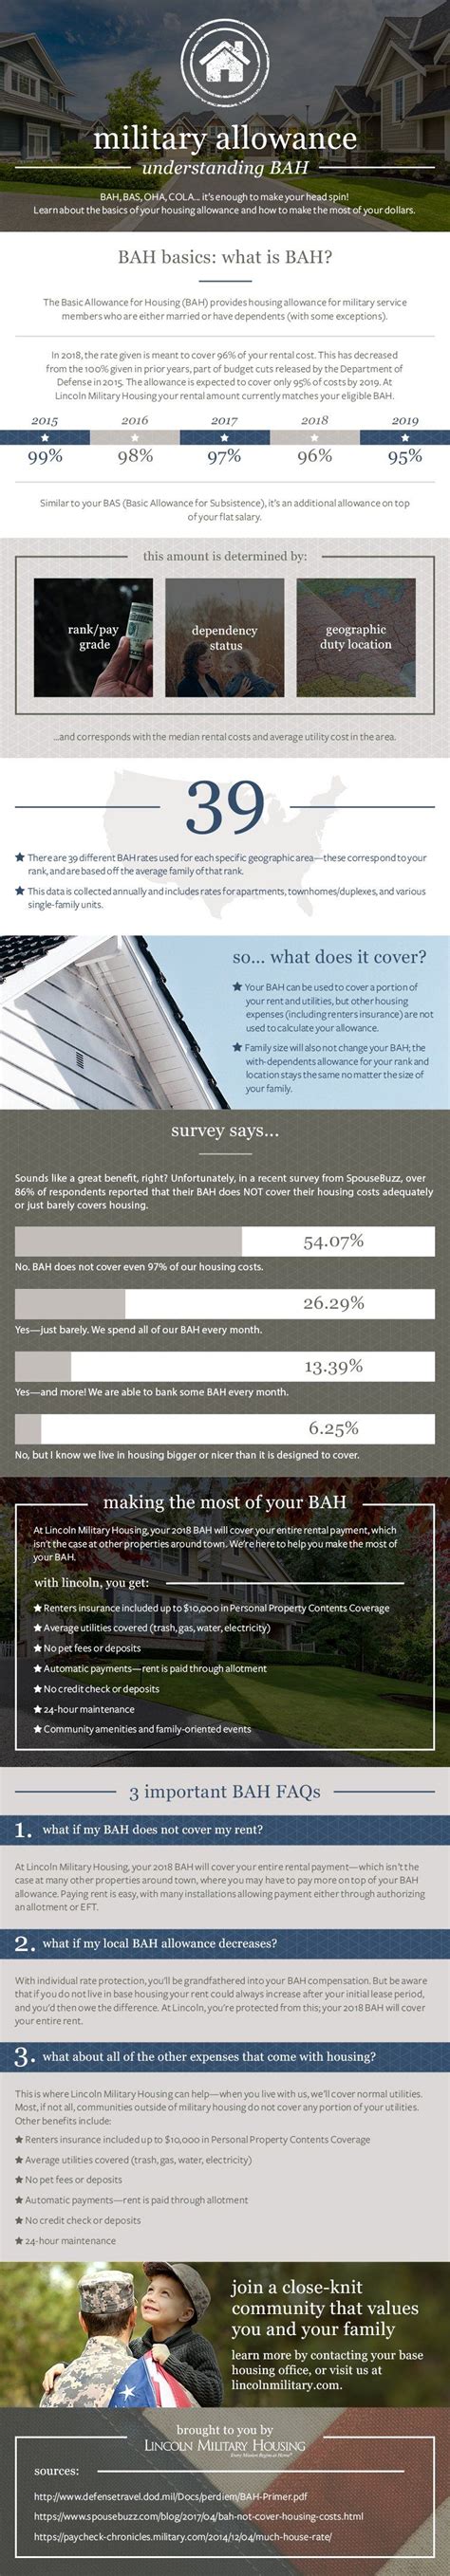 2021 Bah Rates Updated Military Housing Allowance Infographic